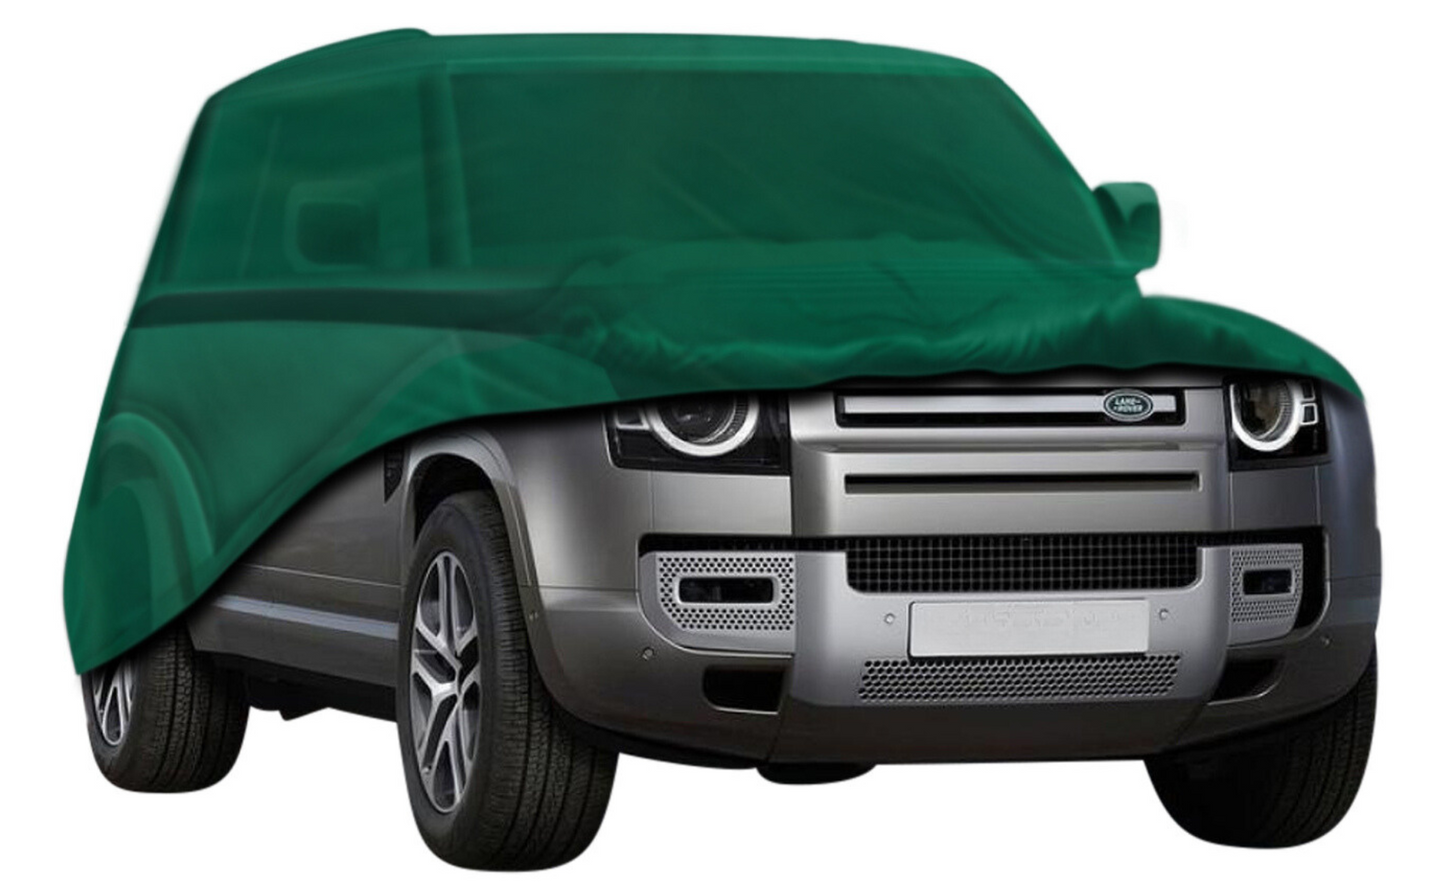 Defender 90 all weather protection cover water Land Rover 2020-2023 gust wind